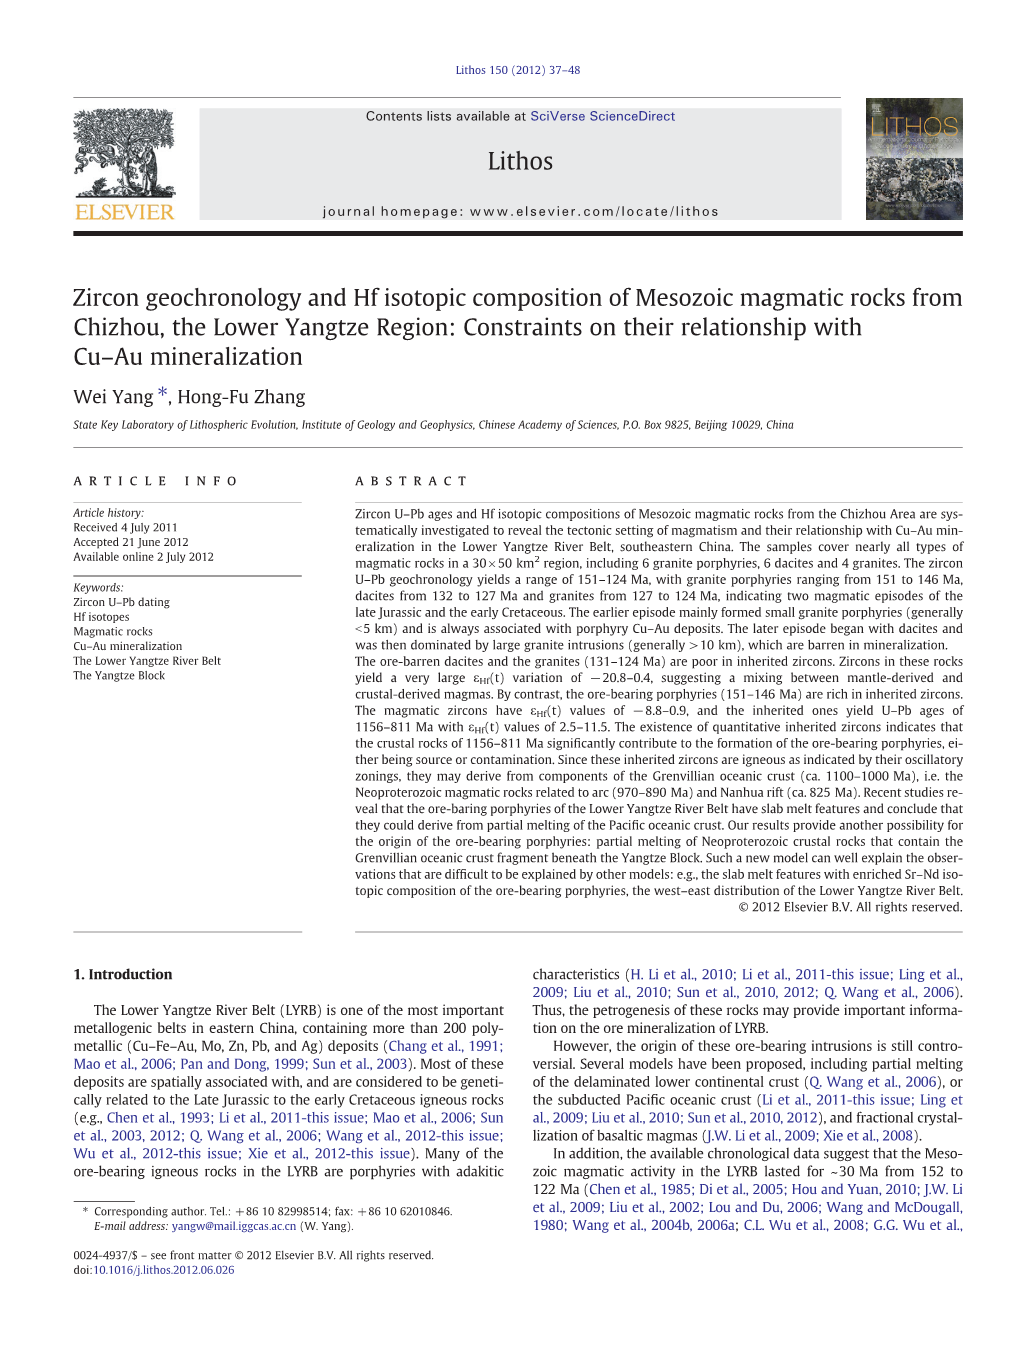 Zircon Geochronology and Hf Isotopic Composition of Mesozoic Magmatic